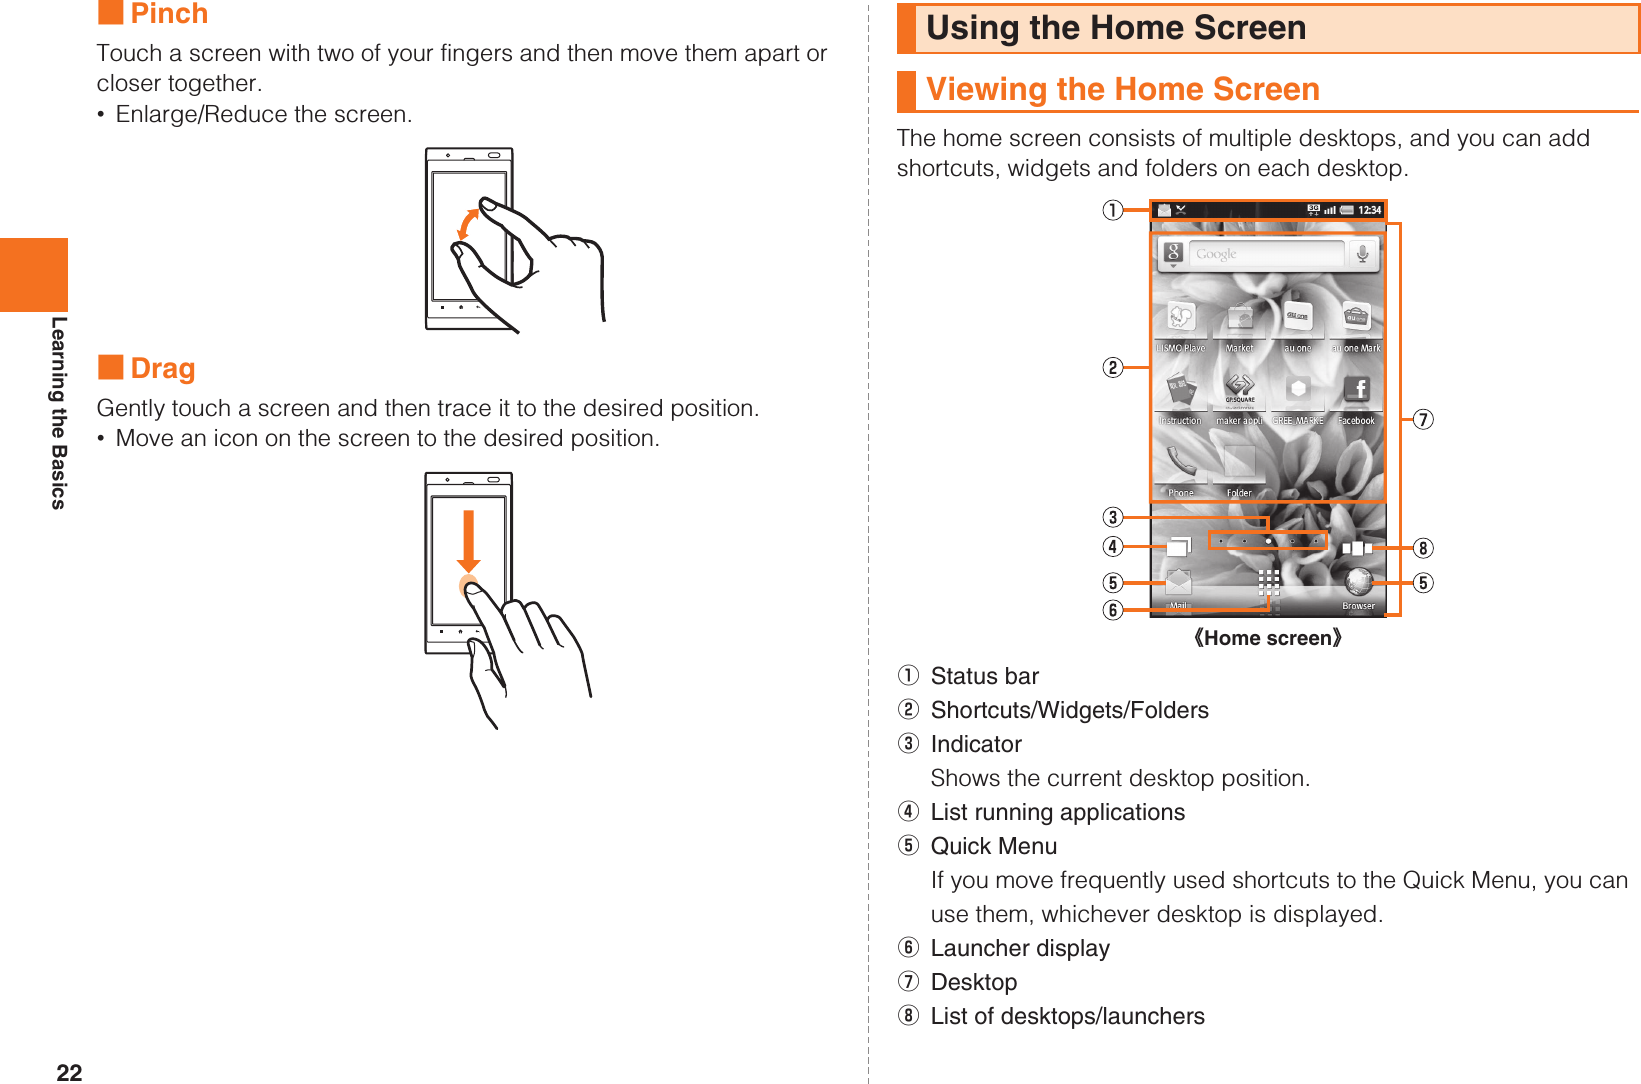 22Learning the Basics■PinchTouch a screen with two of your fingers and then move them apart or closer together.•Enlarge/Reduce the screen.■DragGently touch a screen and then trace it to the desired position.•Move an icon on the screen to the desired position.The home screen consists of multiple desktops, and you can add shortcuts, widgets and folders on each desktop.AStatus barBShortcuts/Widgets/FoldersCIndicatorShows the current desktop position.DList running applicationsEQuick MenuIf you move frequently used shortcuts to the Quick Menu, you can use them, whichever desktop is displayed.FLauncher displayGDesktopHList of desktops/launchersUsing the Home ScreenViewing the Home Screen《Home screen》KUUJAWGDQQMࡍ࡯ࠫ㧞㧜㧝㧝ᐕ㧝㧞᦬㧝ᣣޓᧁᦐᣣޓඦᓟ㧡ᤨ㧝㧥ಽ